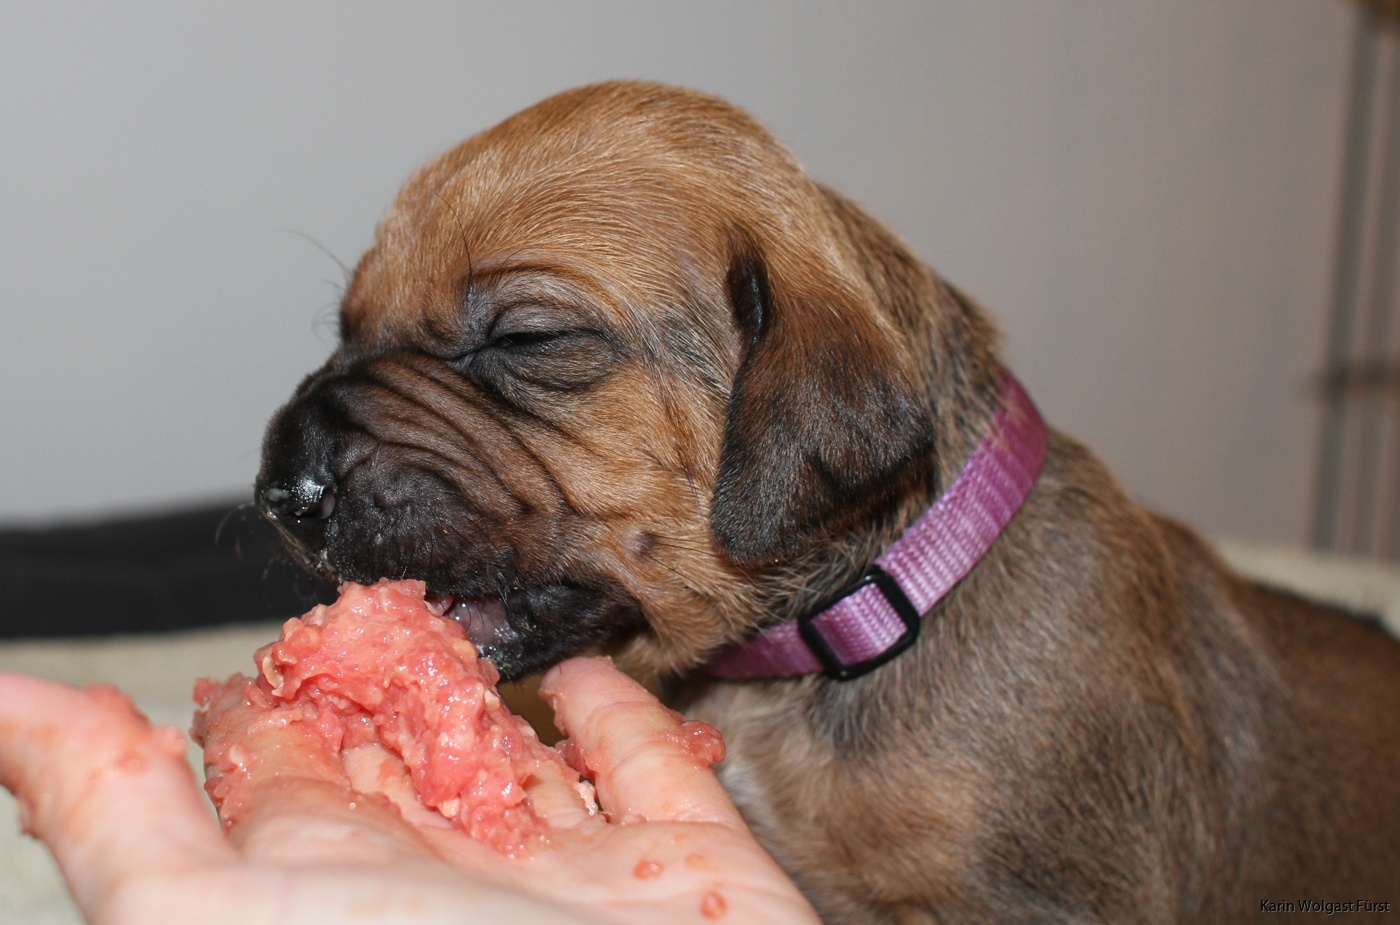 when can puppies have solid food